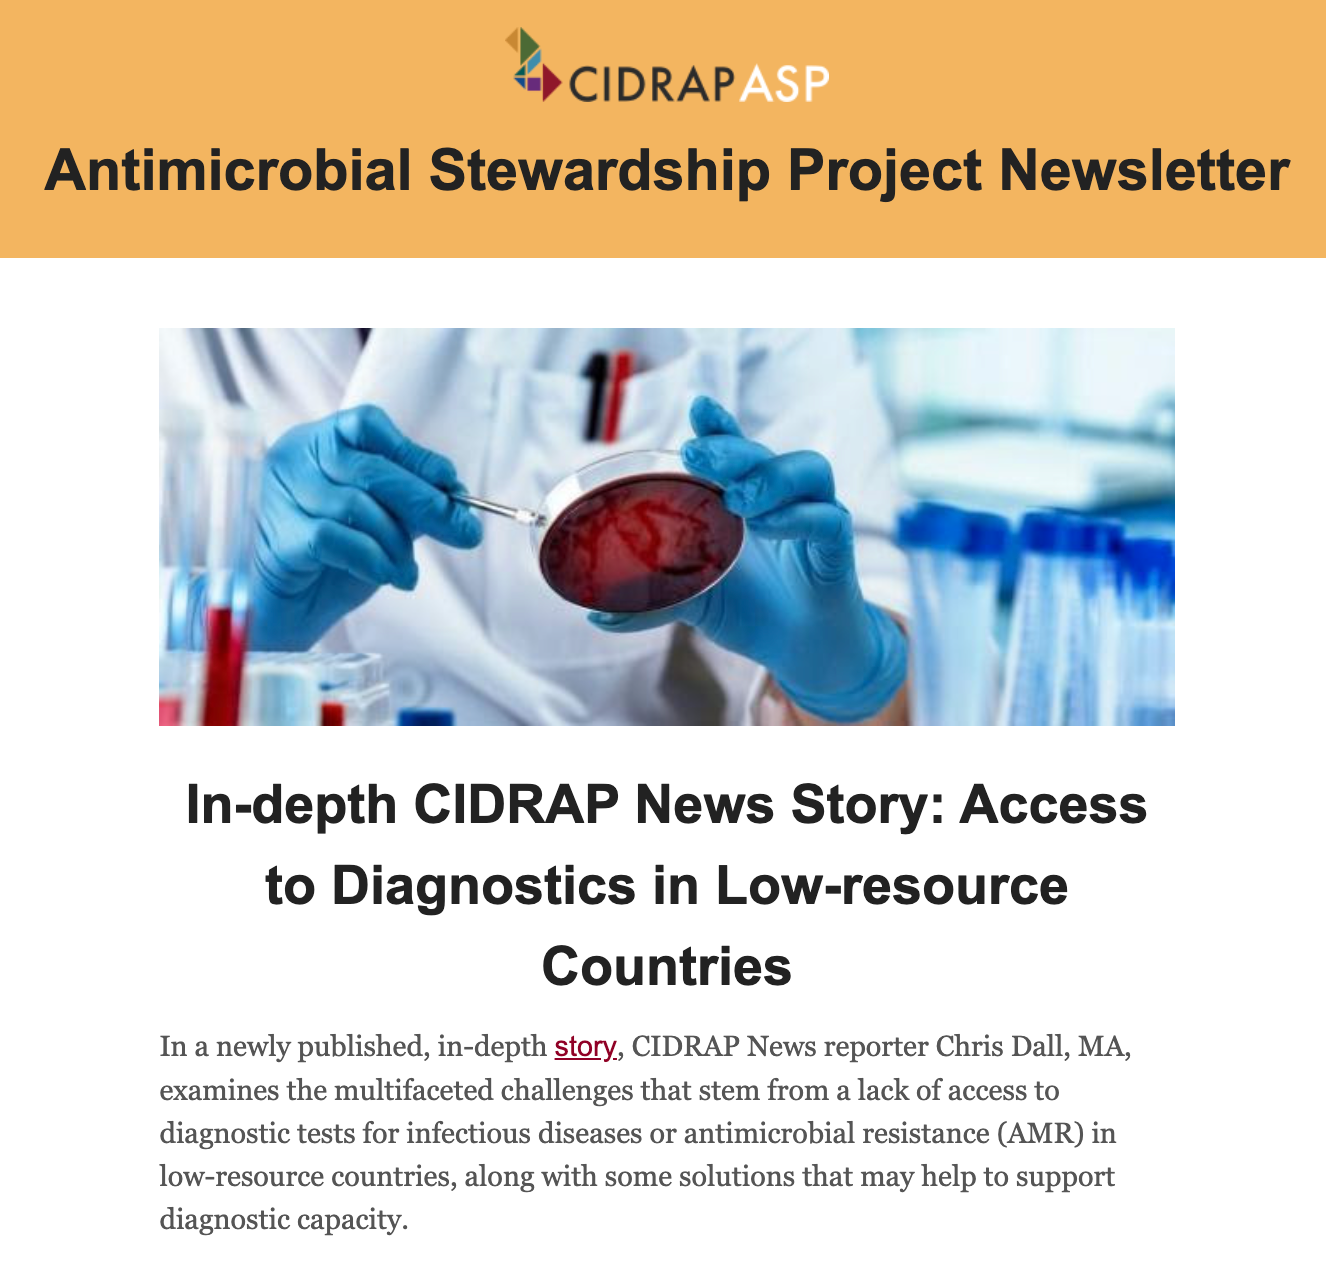 A gloved person holds a swab and a Petri dish. Text reads "CIDRAP ASP Antimicrobial Stewardship Project Newsletter" below which is a news story titled "In-depth CIDRAP News Story: Access to Diagnostics in Low-resource Countries"